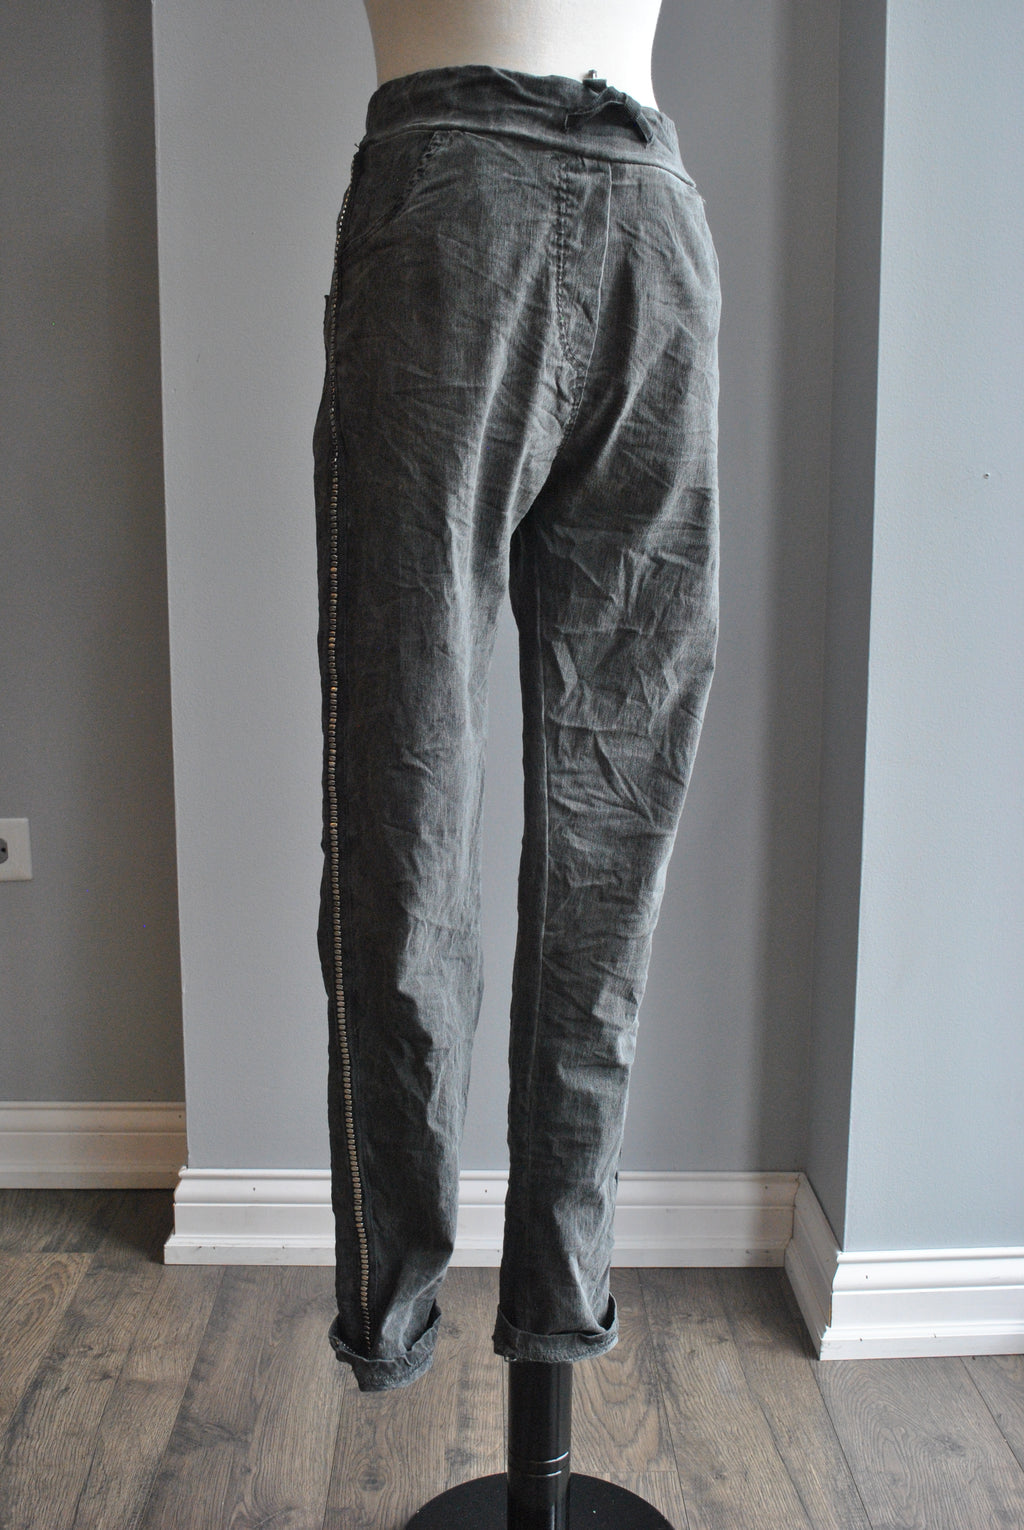 CHARCOAL GREY PANTS WITH SIDE SILVER TRIM AND POCKETS